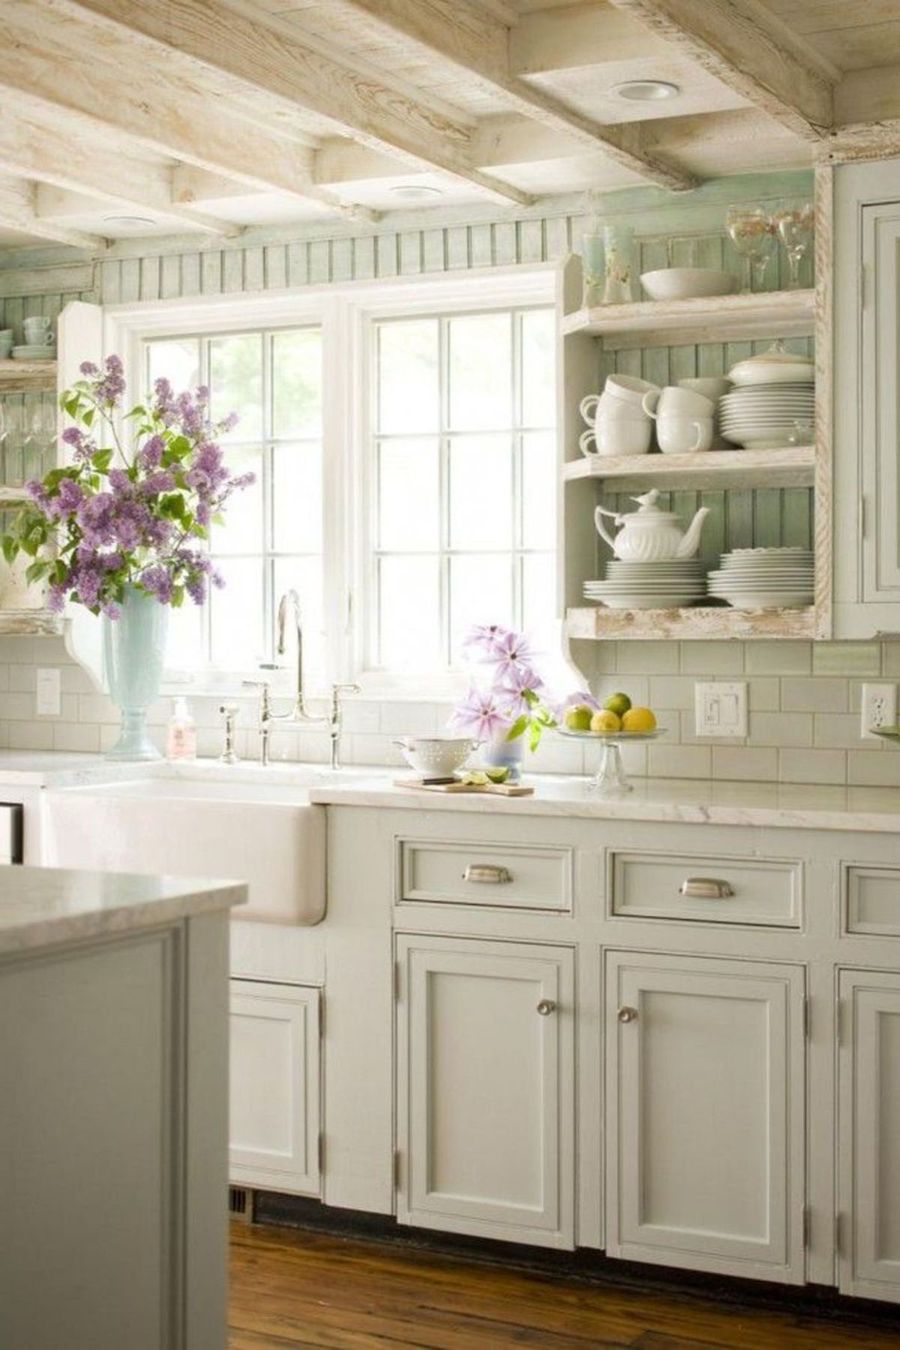 Creamy White Cabinets and Wood Beam ceiling in Country Kitchen